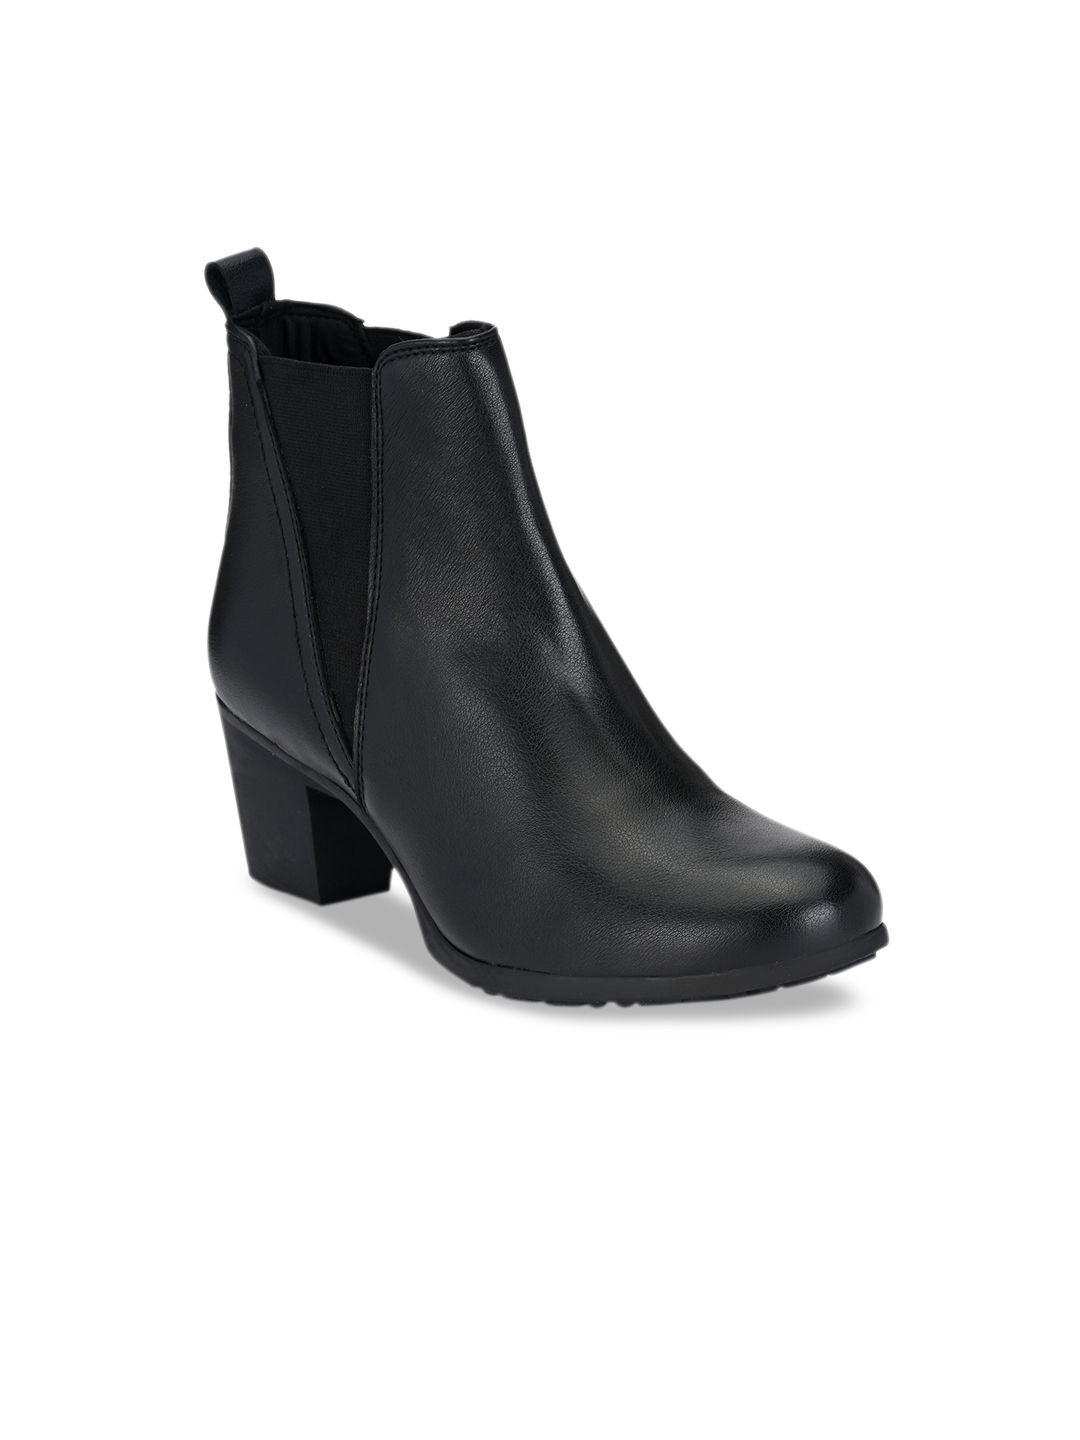 Delize Women Black Solid High-Top Heeled Chelsea Boots Price in India